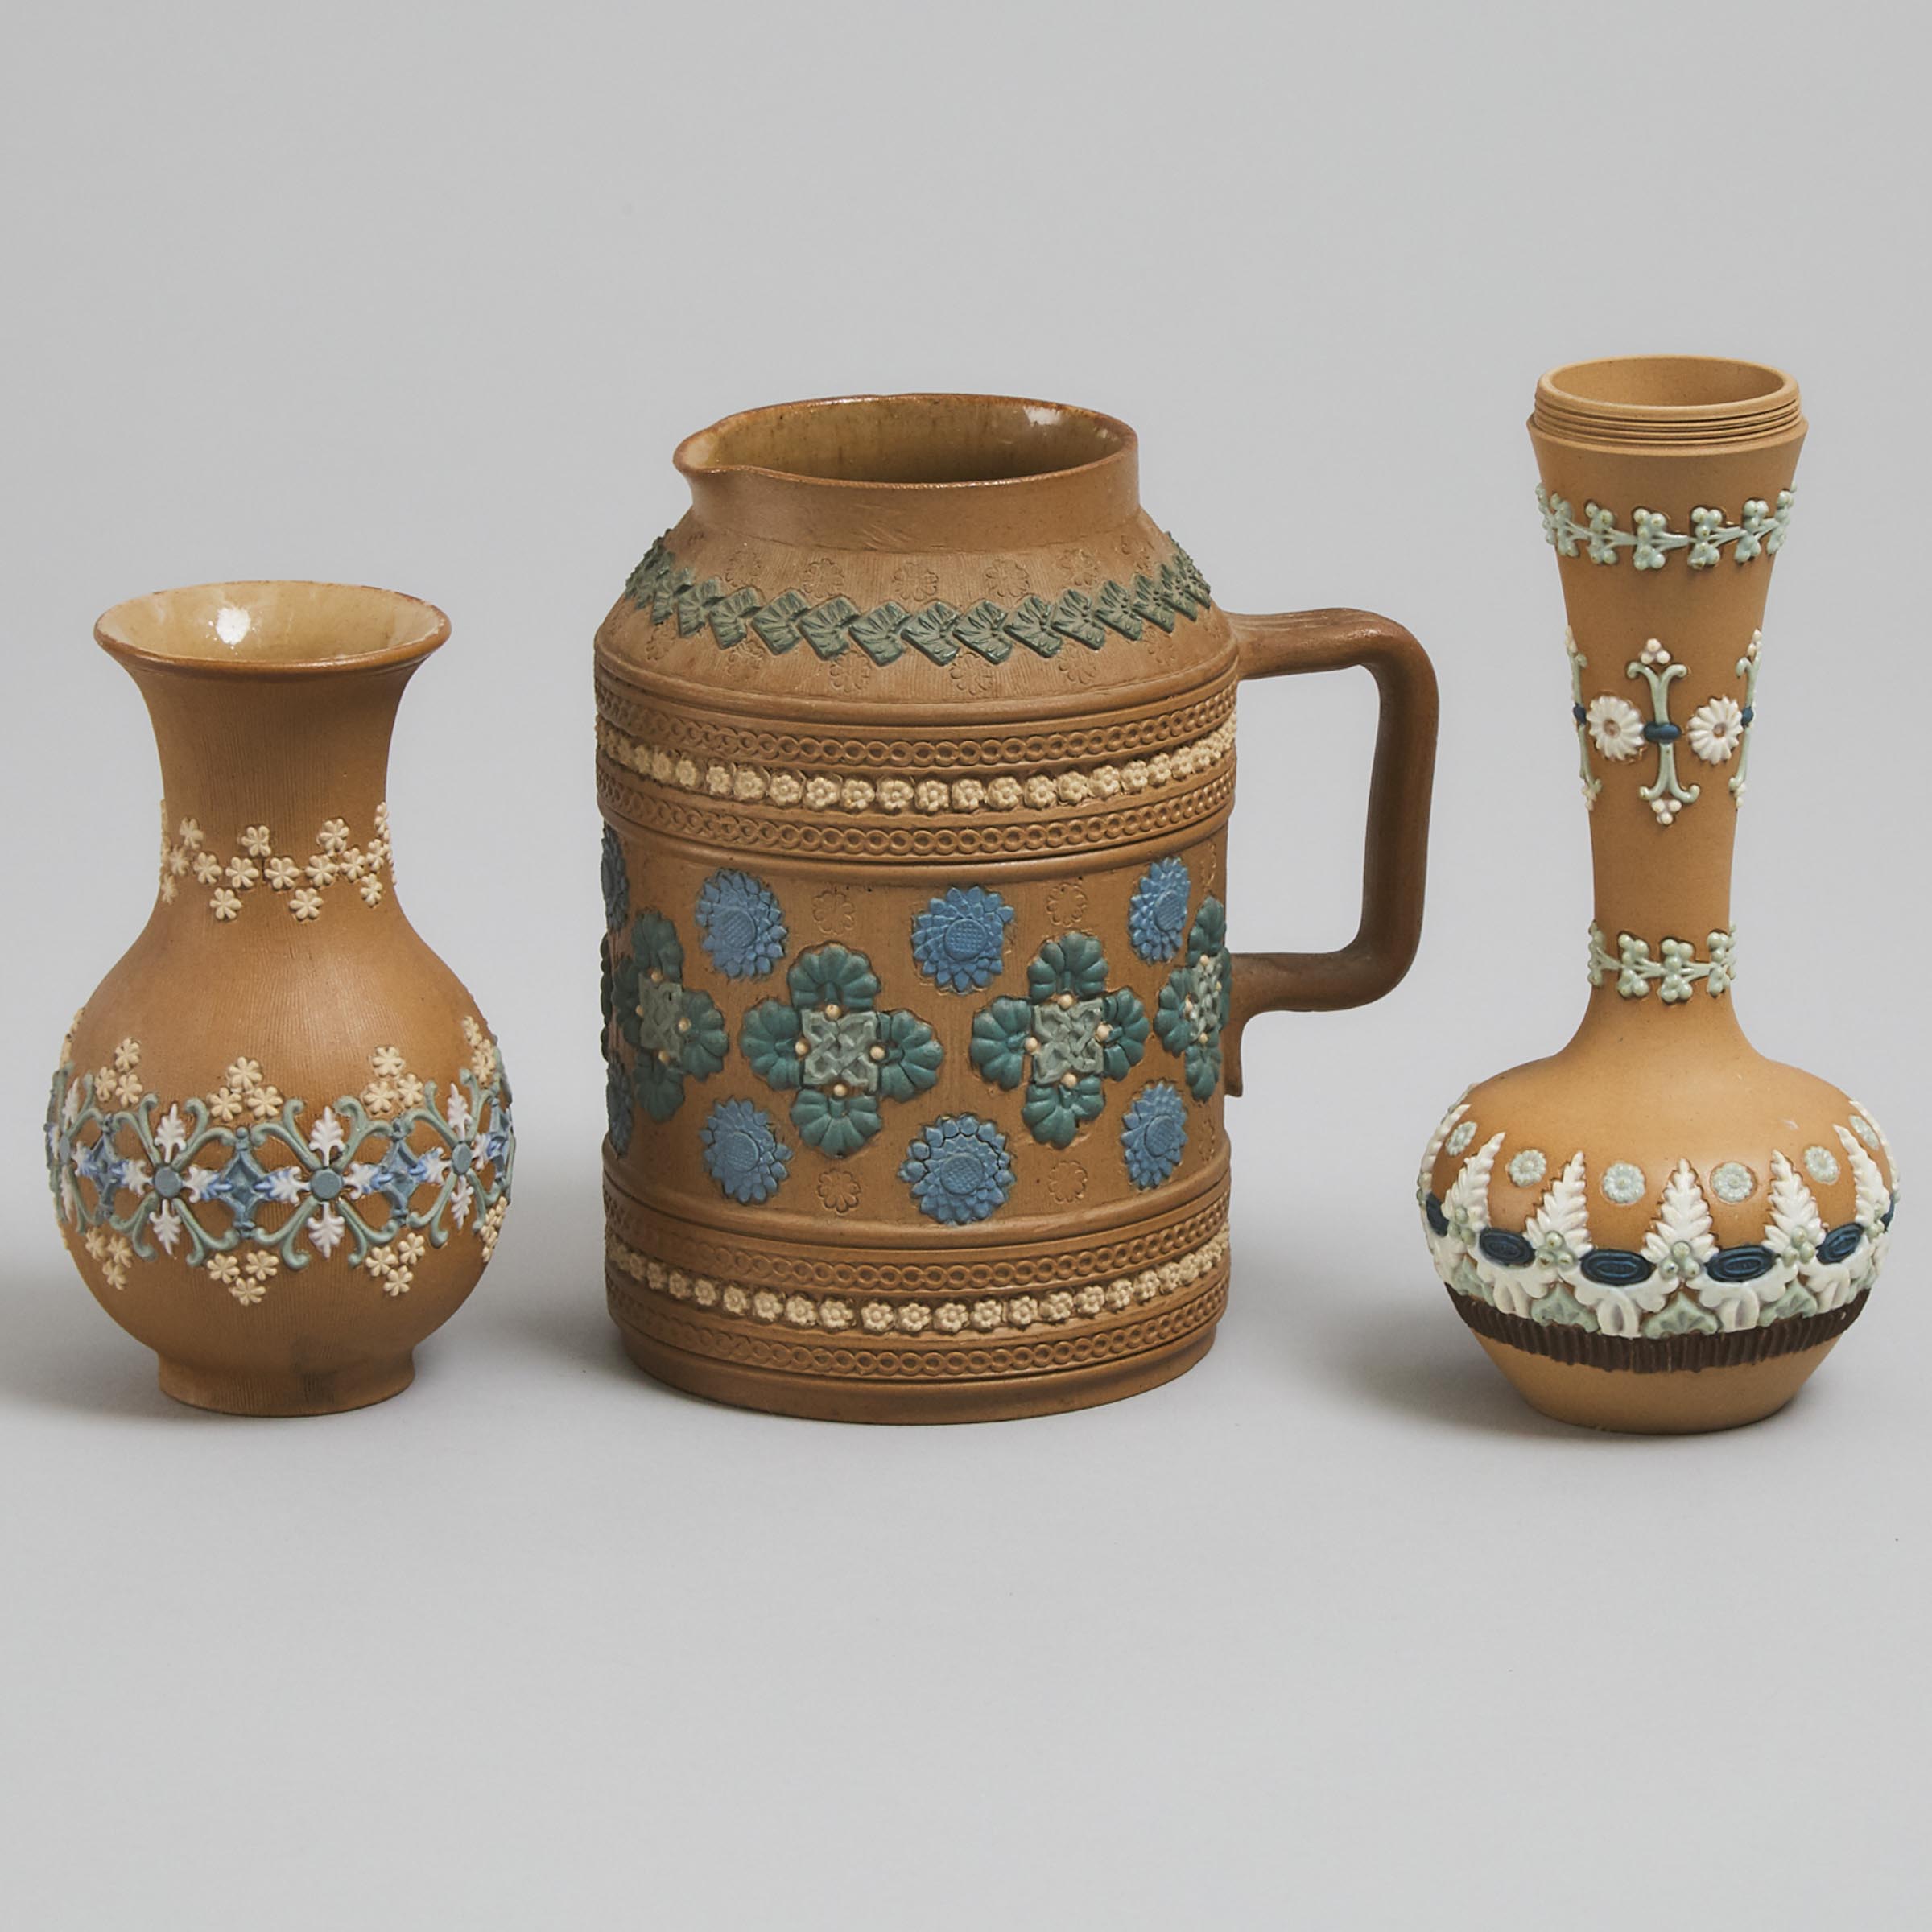 Two Doulton Lambeth Silicon Vases and a Jug, c.1880